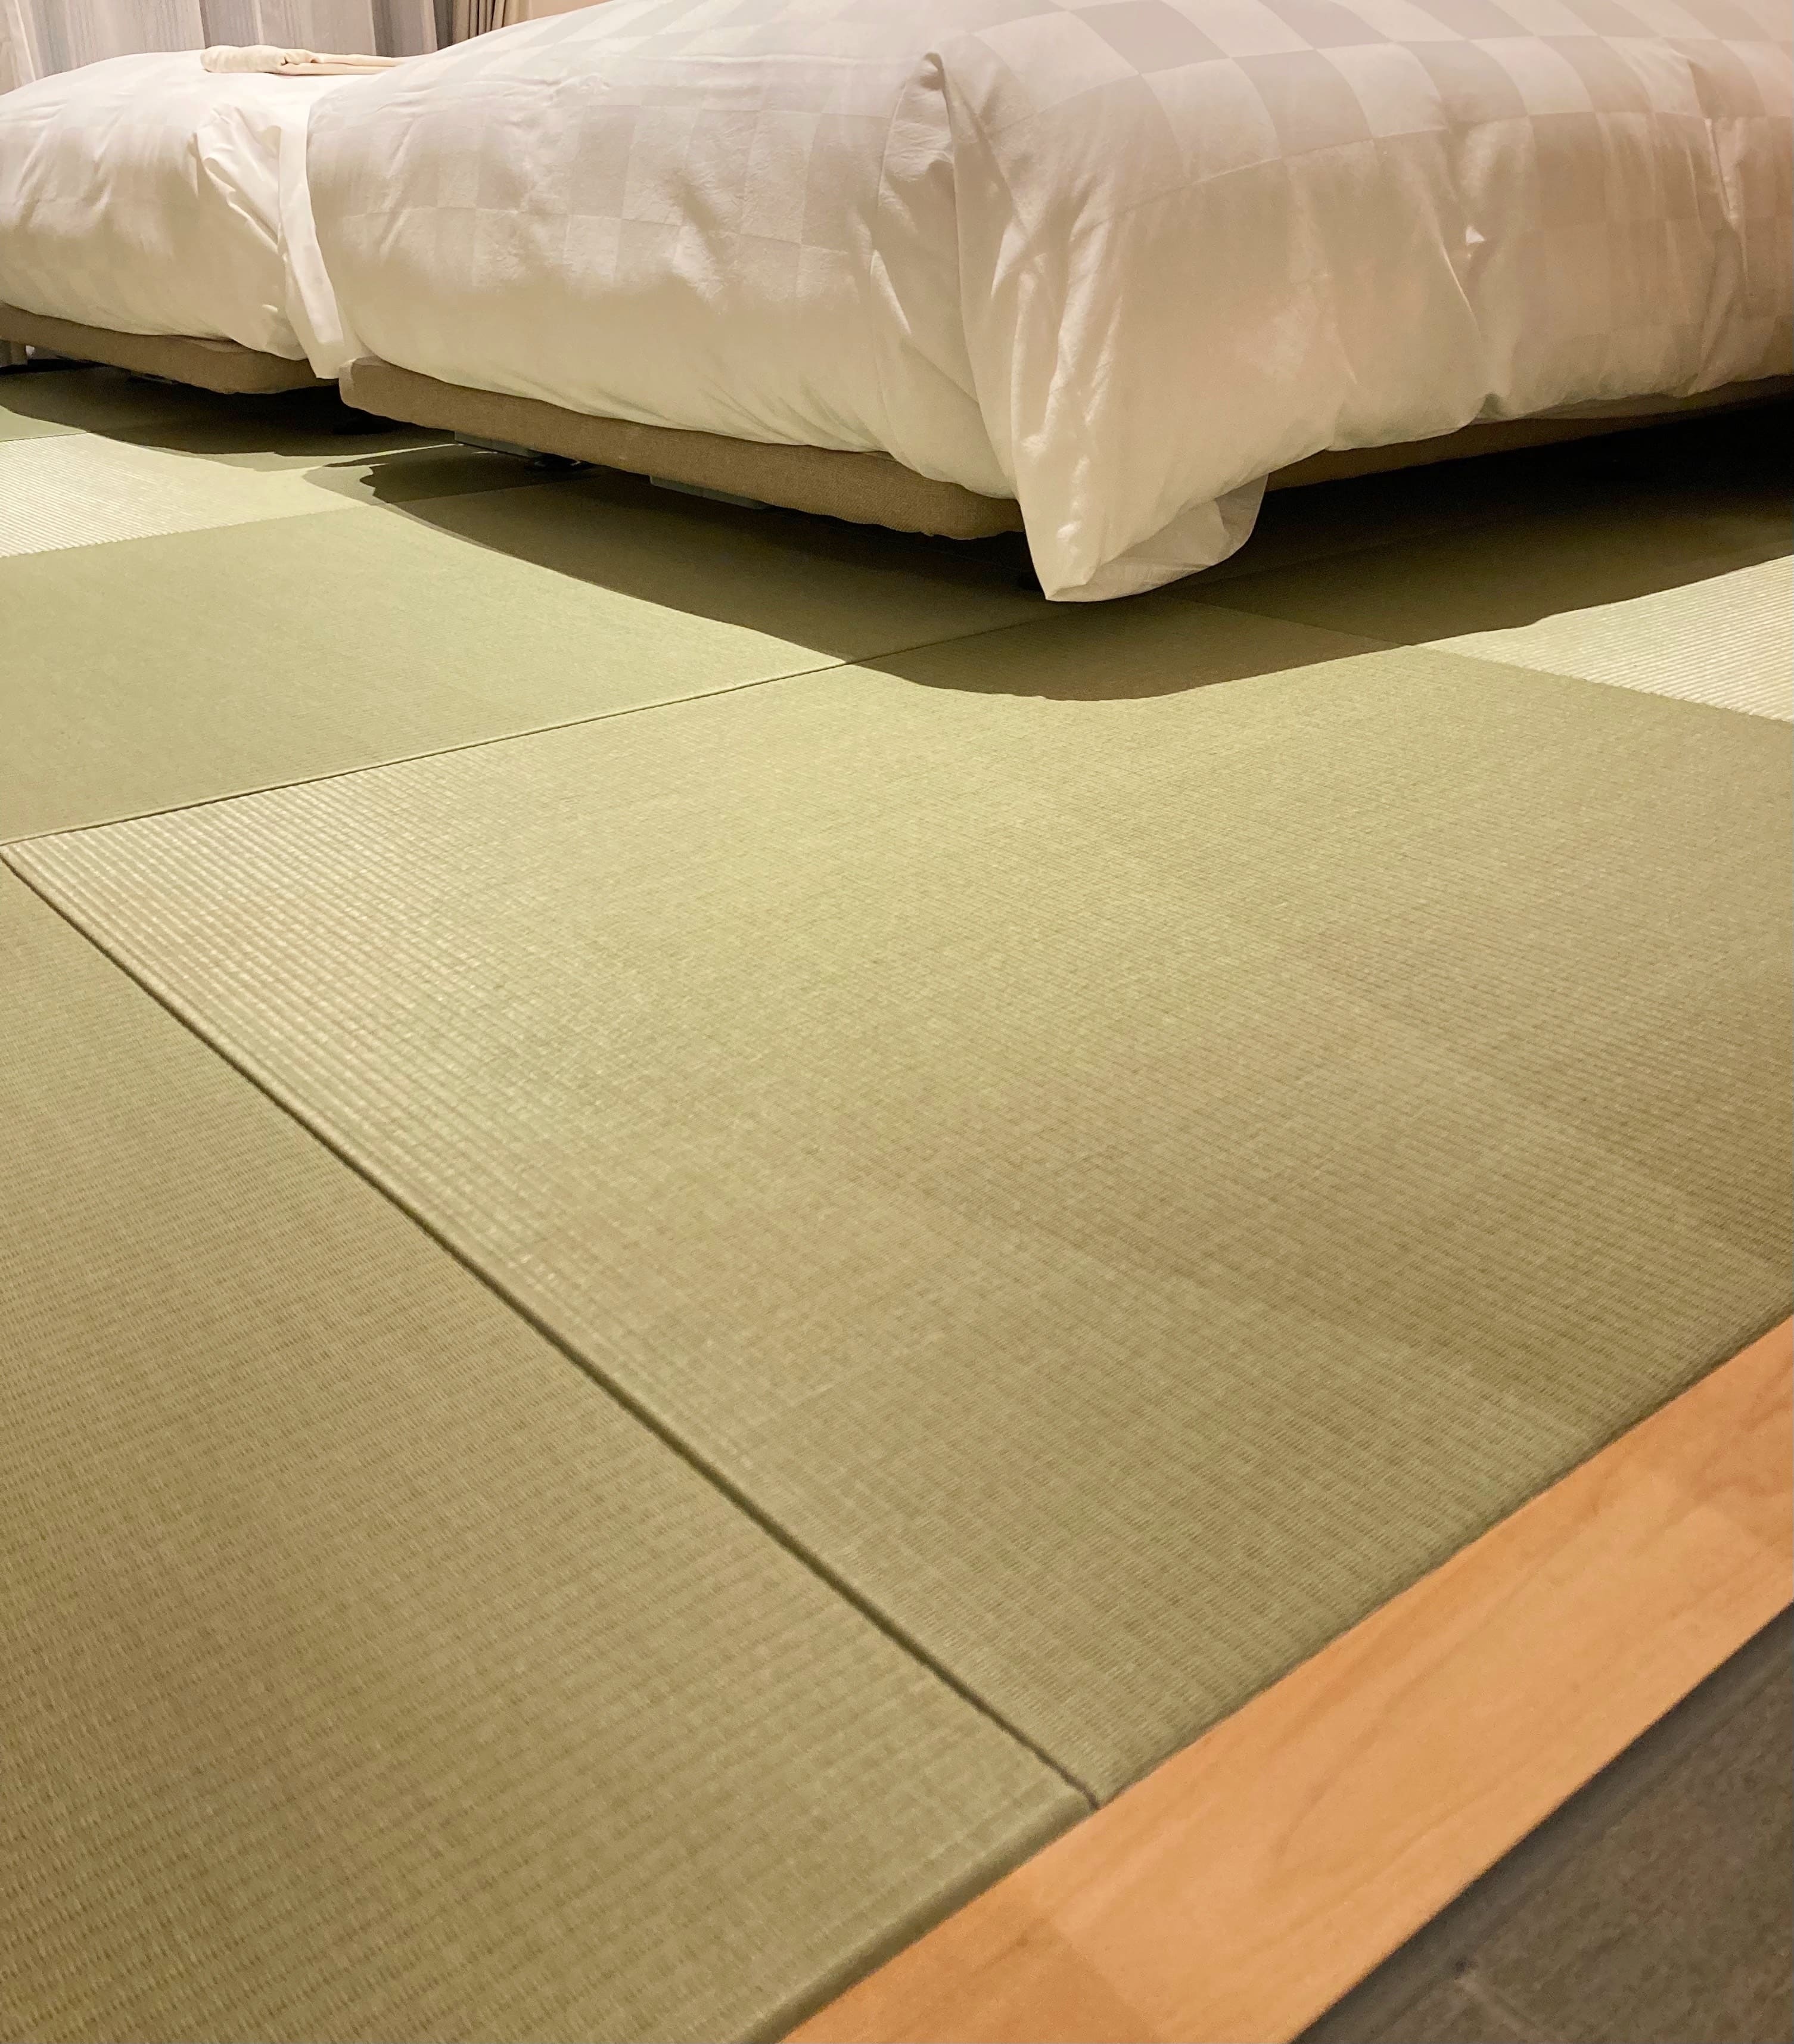 [All guest rooms] You can relax on tatami mats